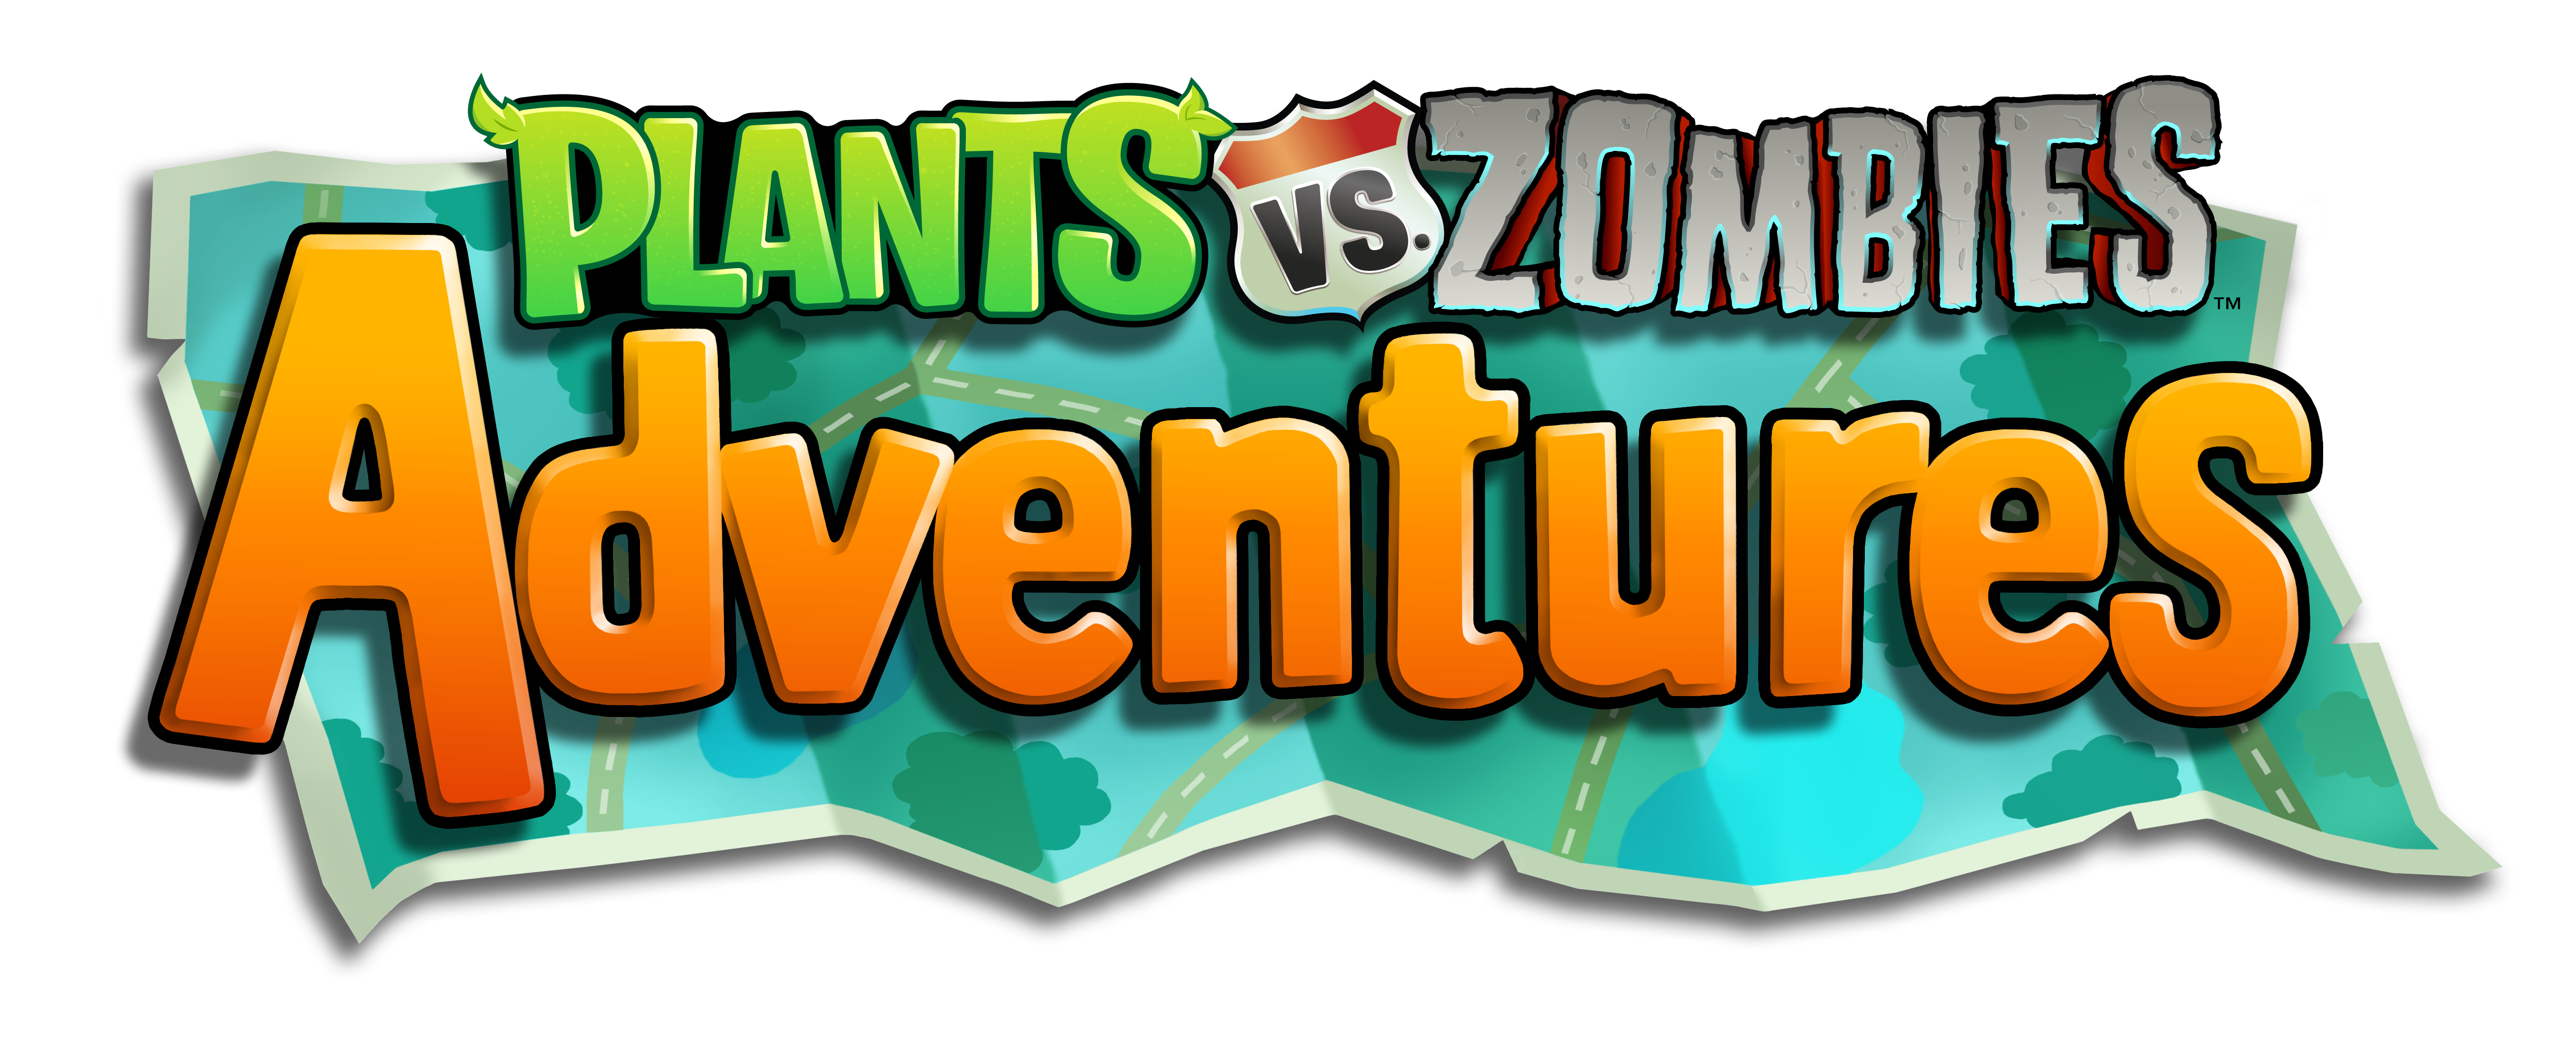 why did plants vs zombies adventures close